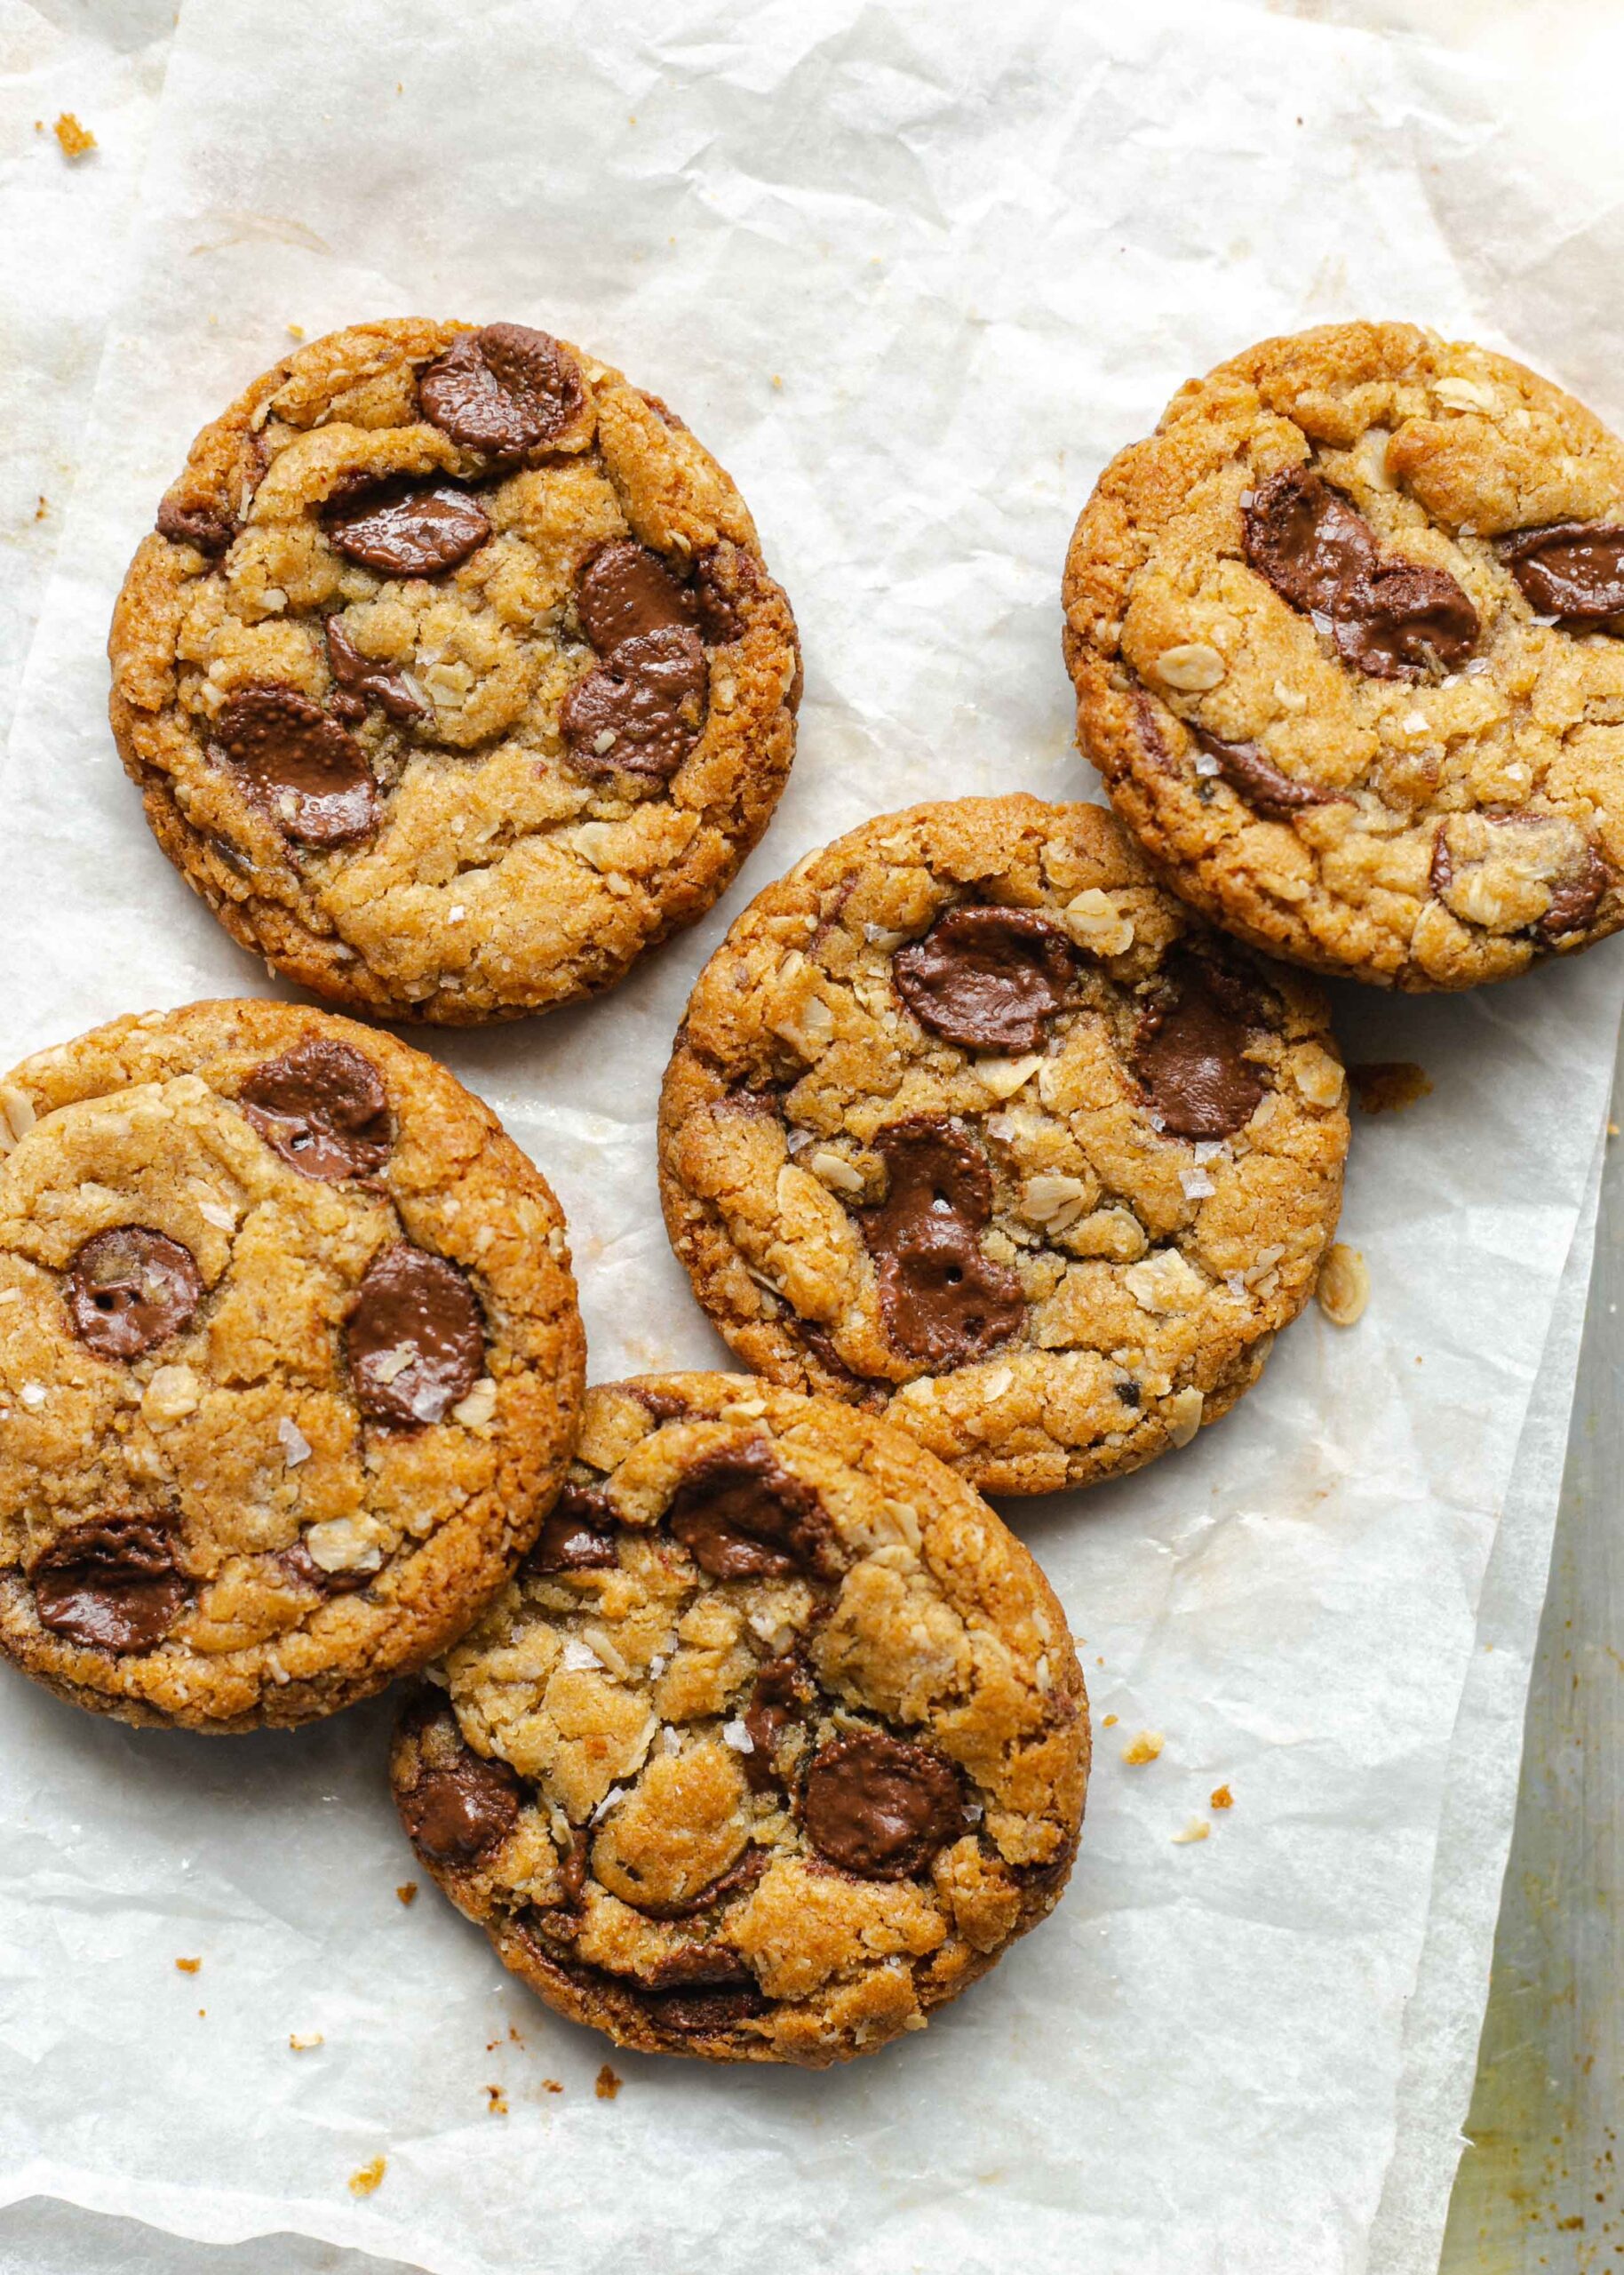 Pile of gluten free chocolate chip cookies low FODMAP and vegan